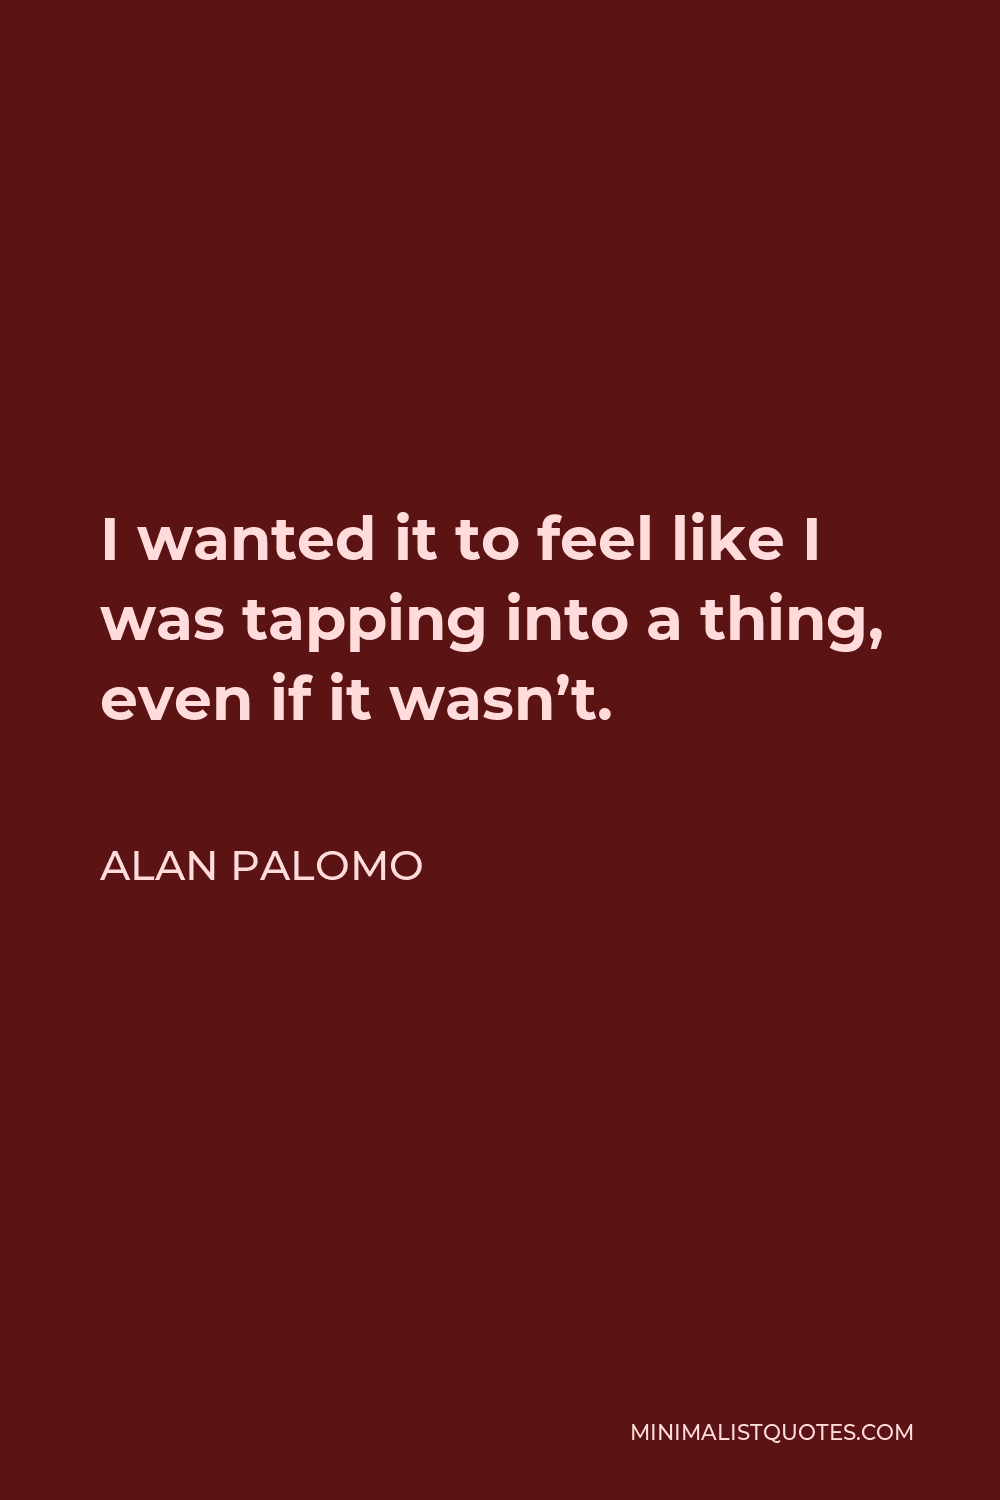 Alan Palomo Quote - I wanted it to feel like I was tapping into a thing, even if it wasn’t.